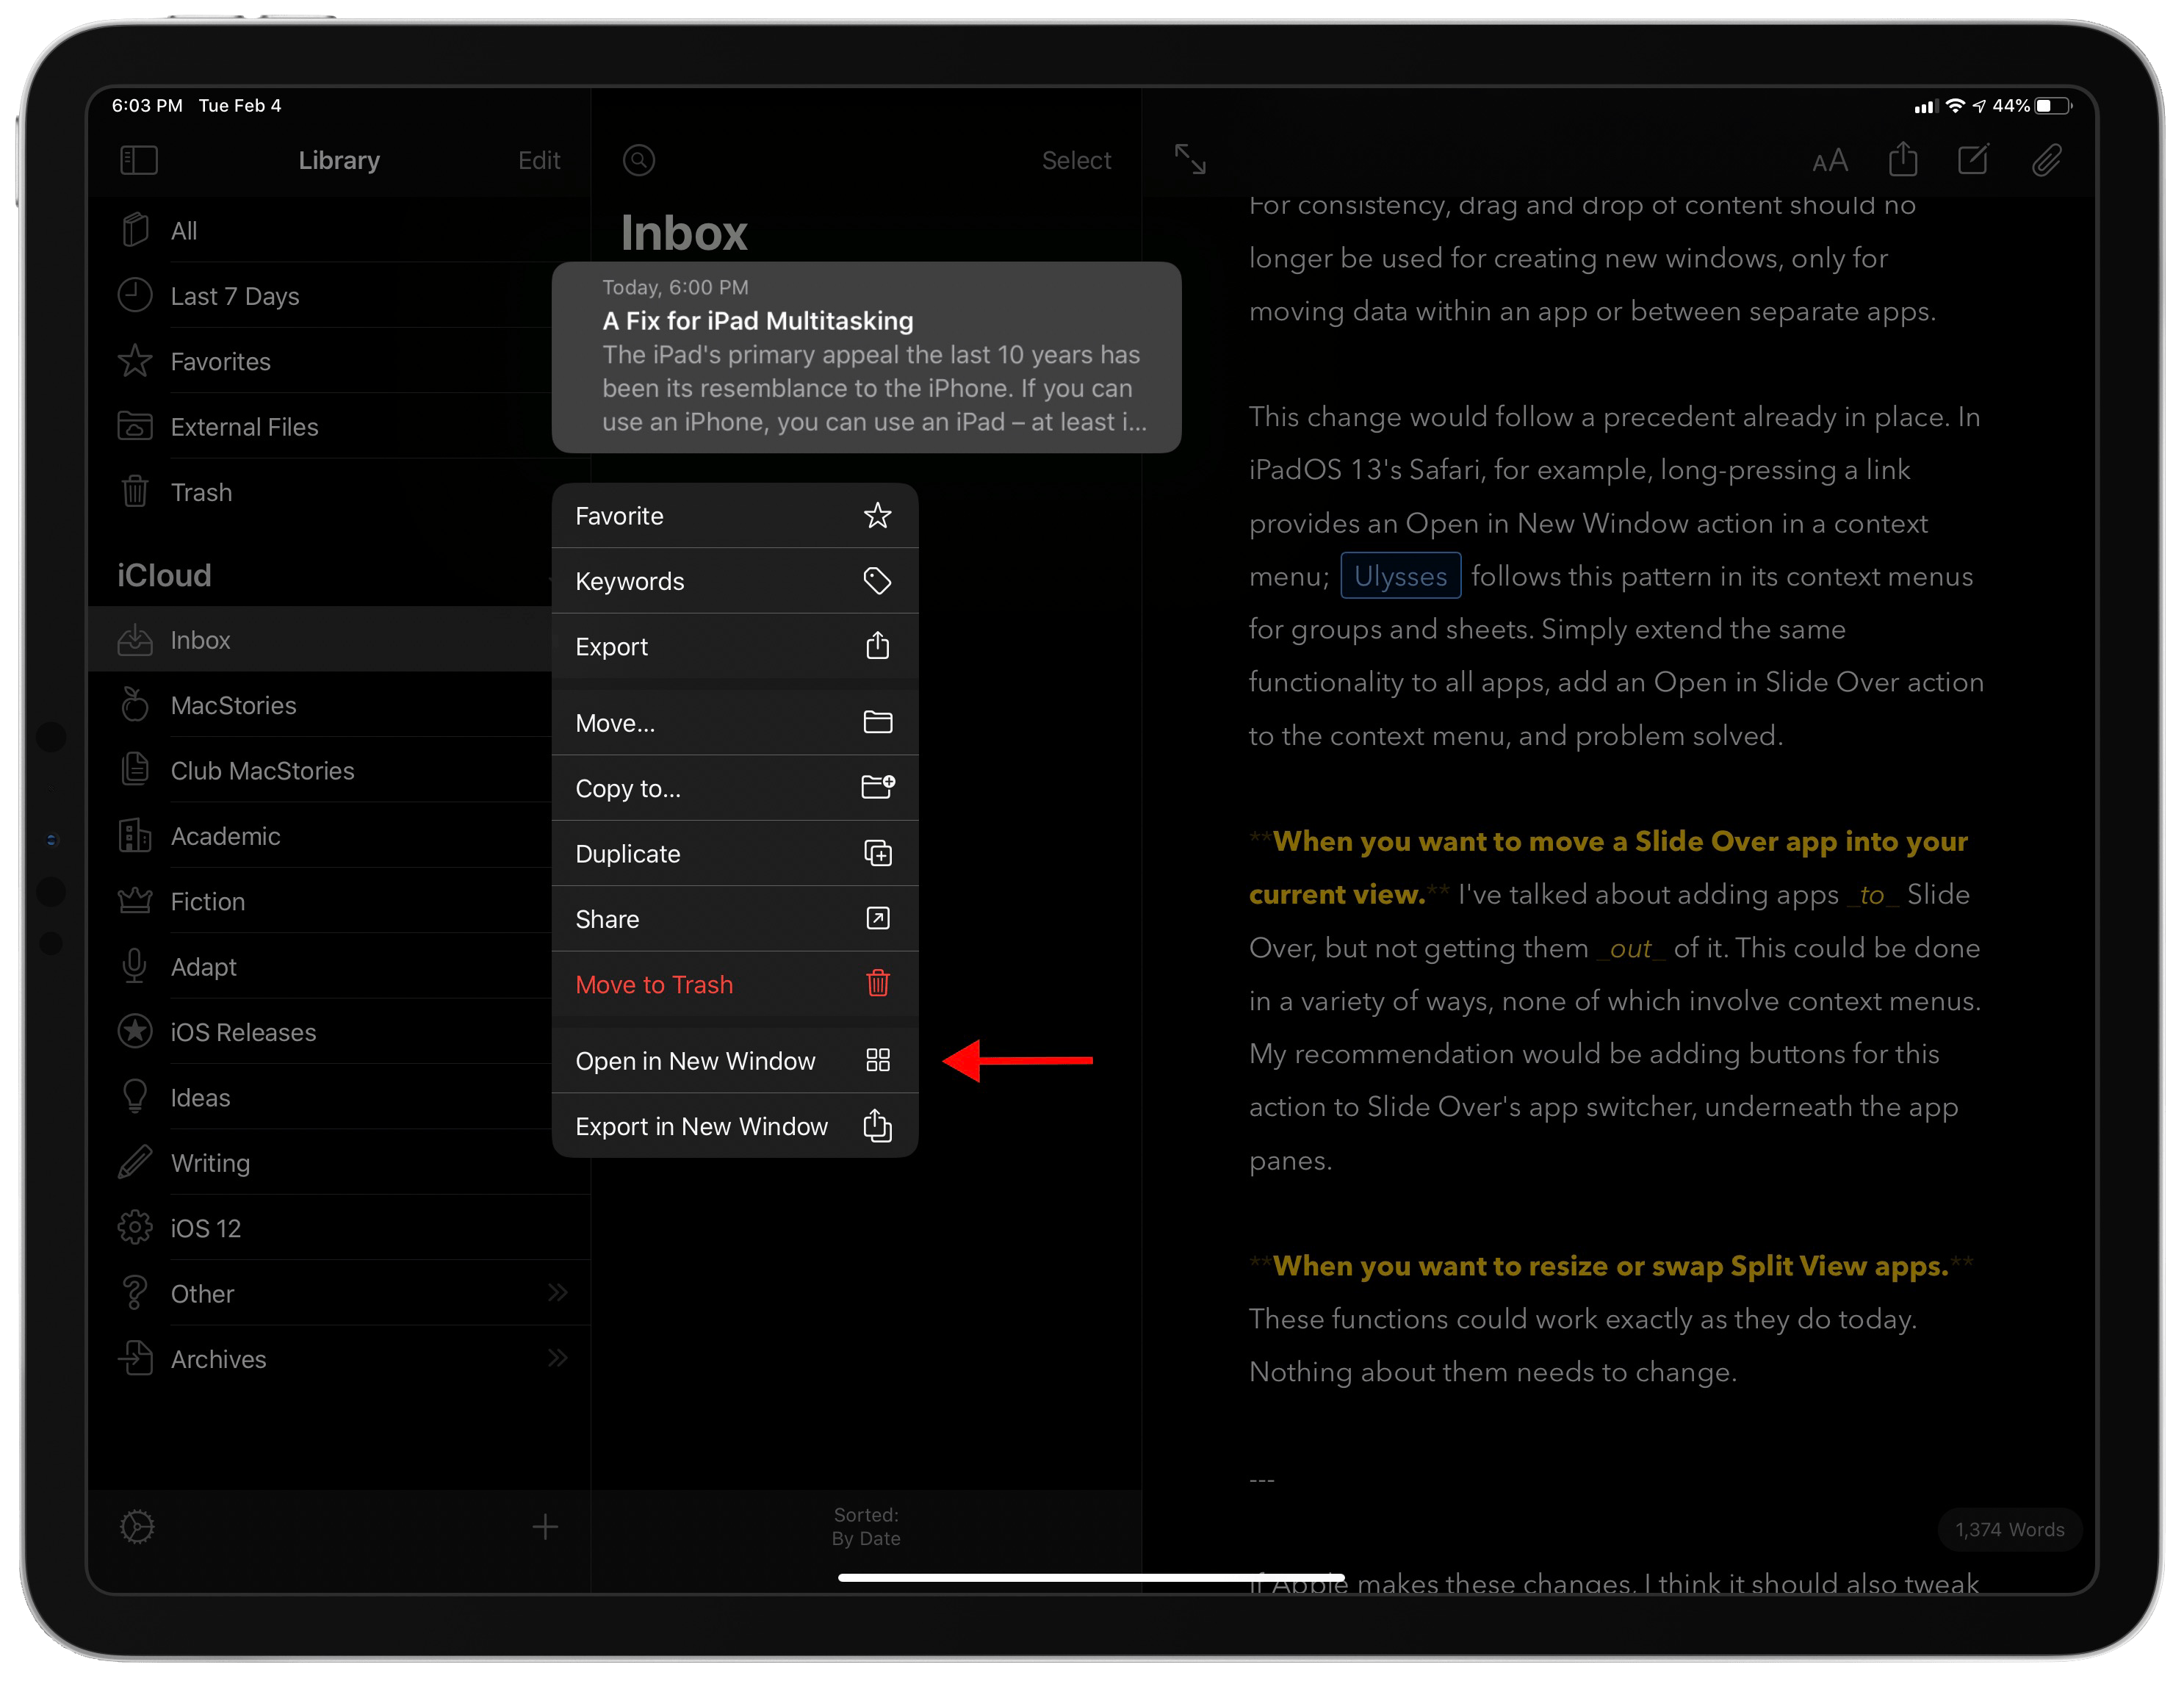 Apps like Ulysses already offer an in-app option for creating new windows.